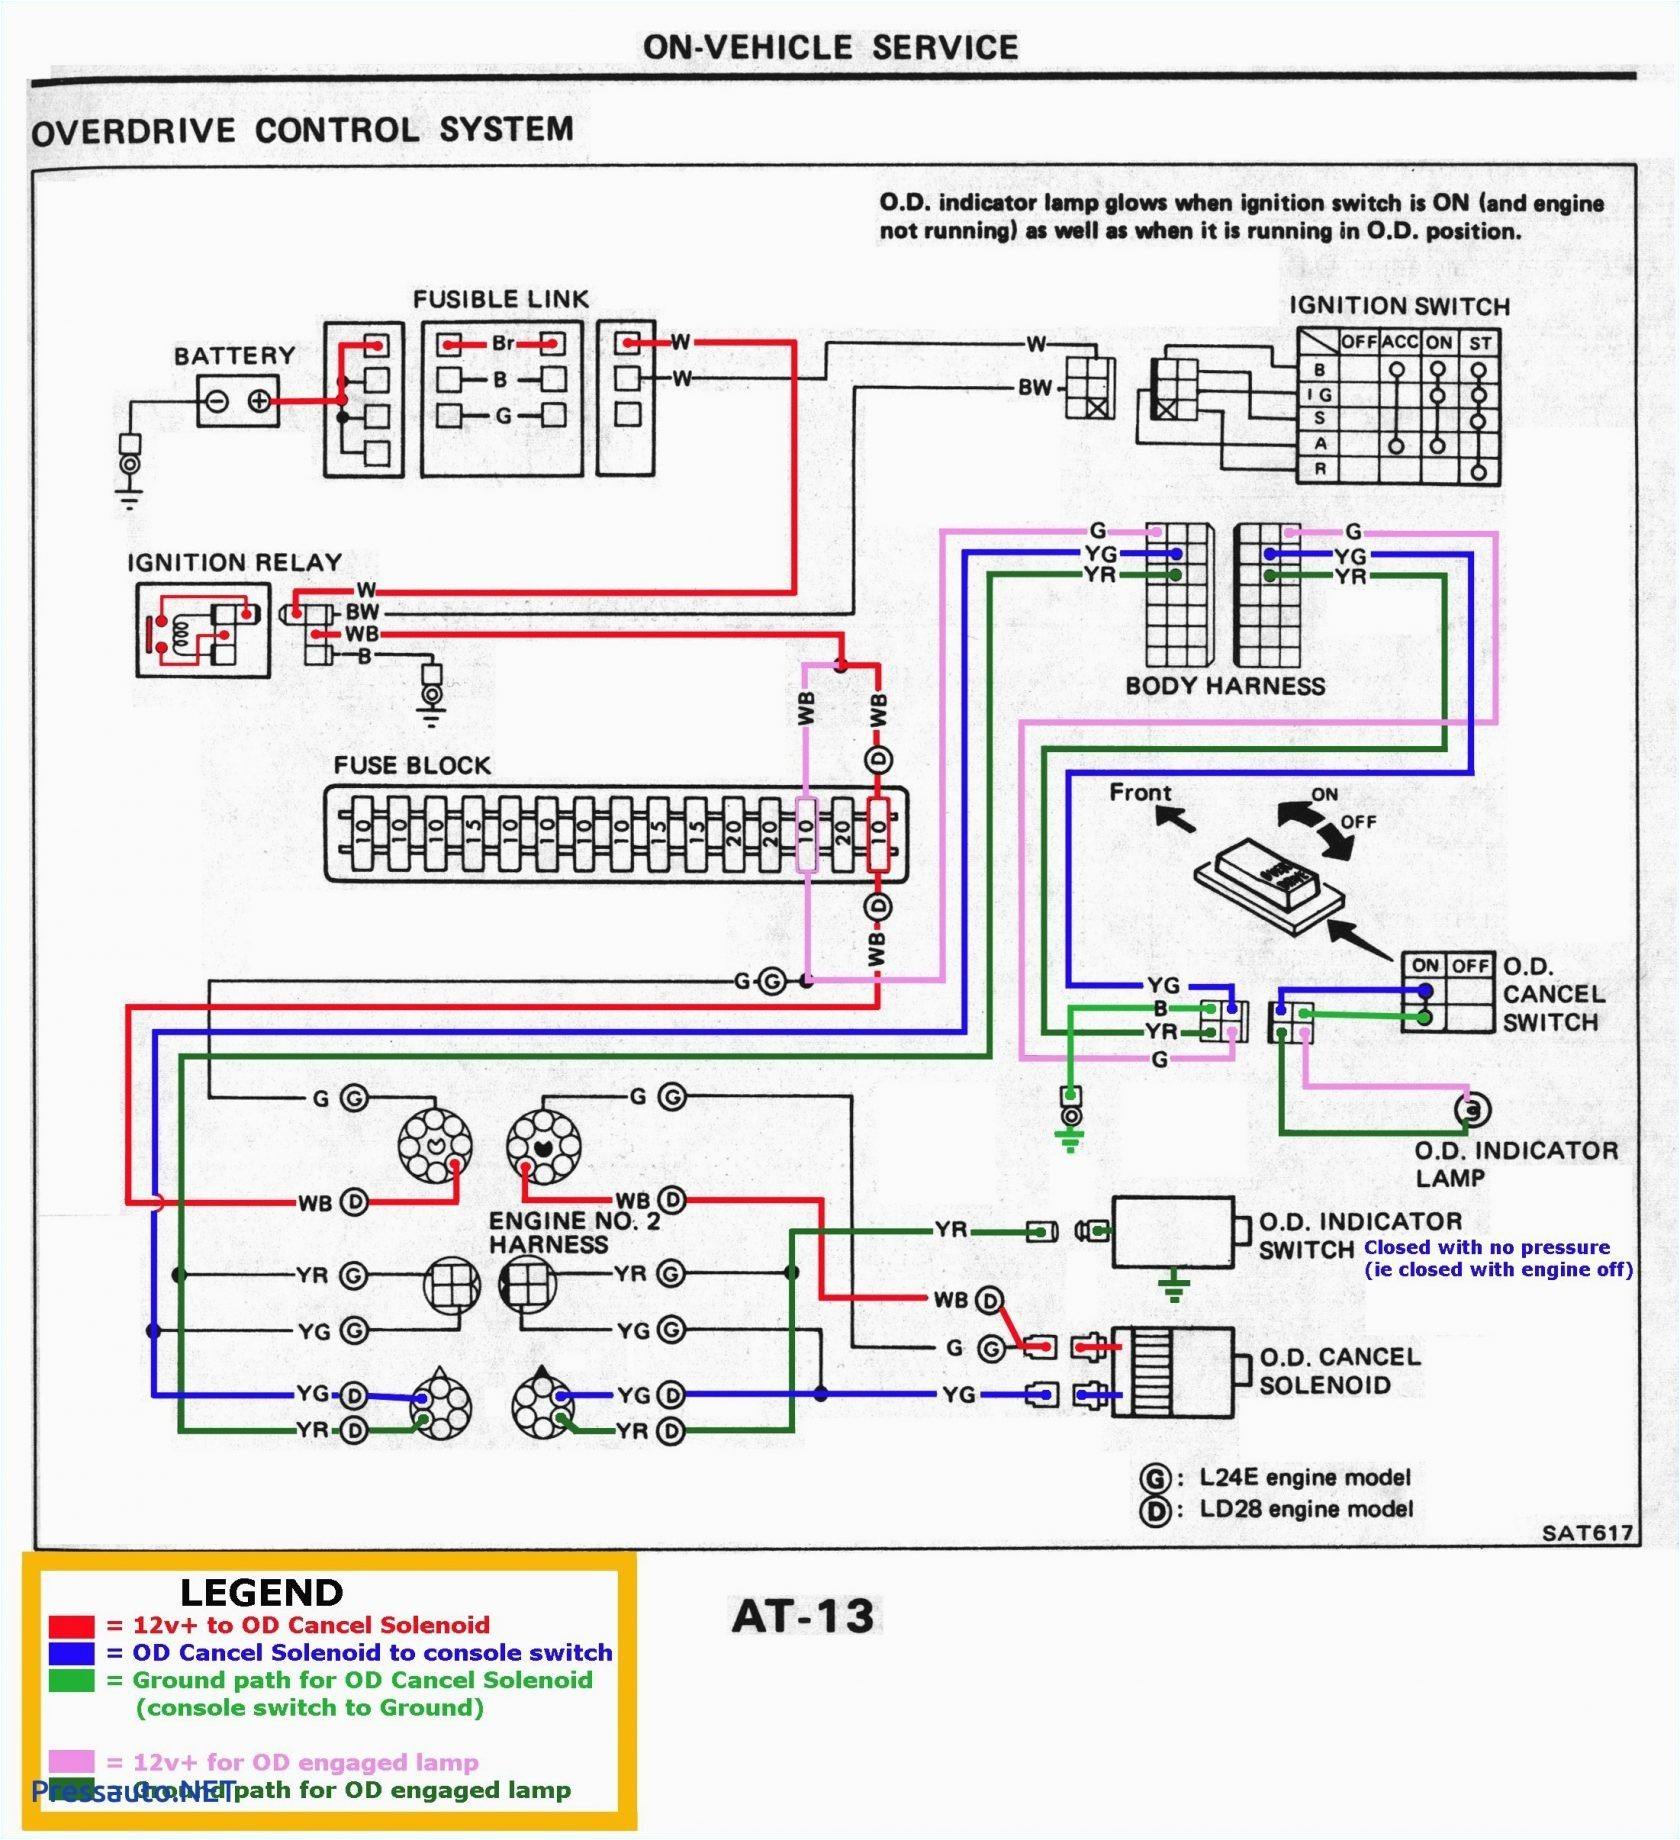 2001 mitsubishi eclipse wiring diagram rate caravan australia valid engine test stand of within automotive 5cd966e64e551 jpg